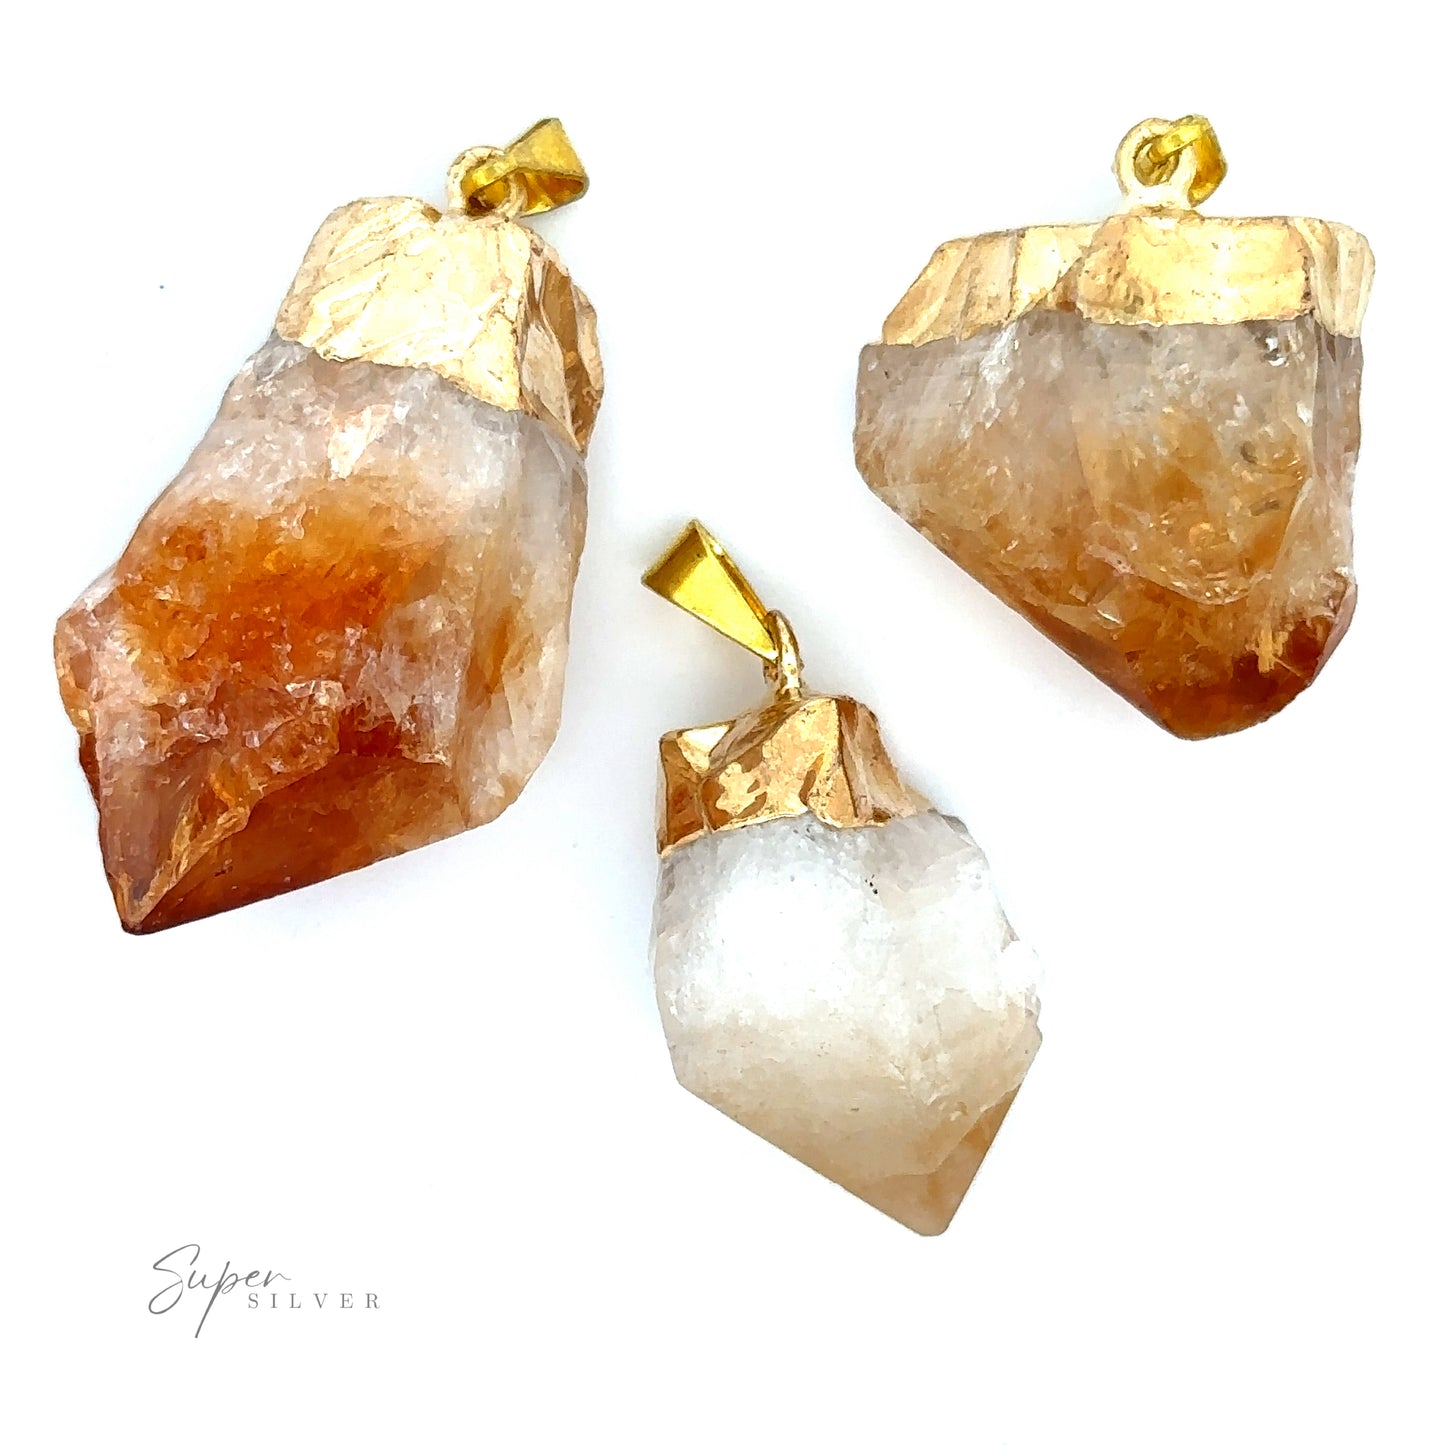 
                  
                    Three Raw Crystal Pendants With Gold Cap, arranged on a white background. The crystals are partly translucent with a gradient from white to amber. Text "Super Silver" appears in the bottom left corner.
                  
                